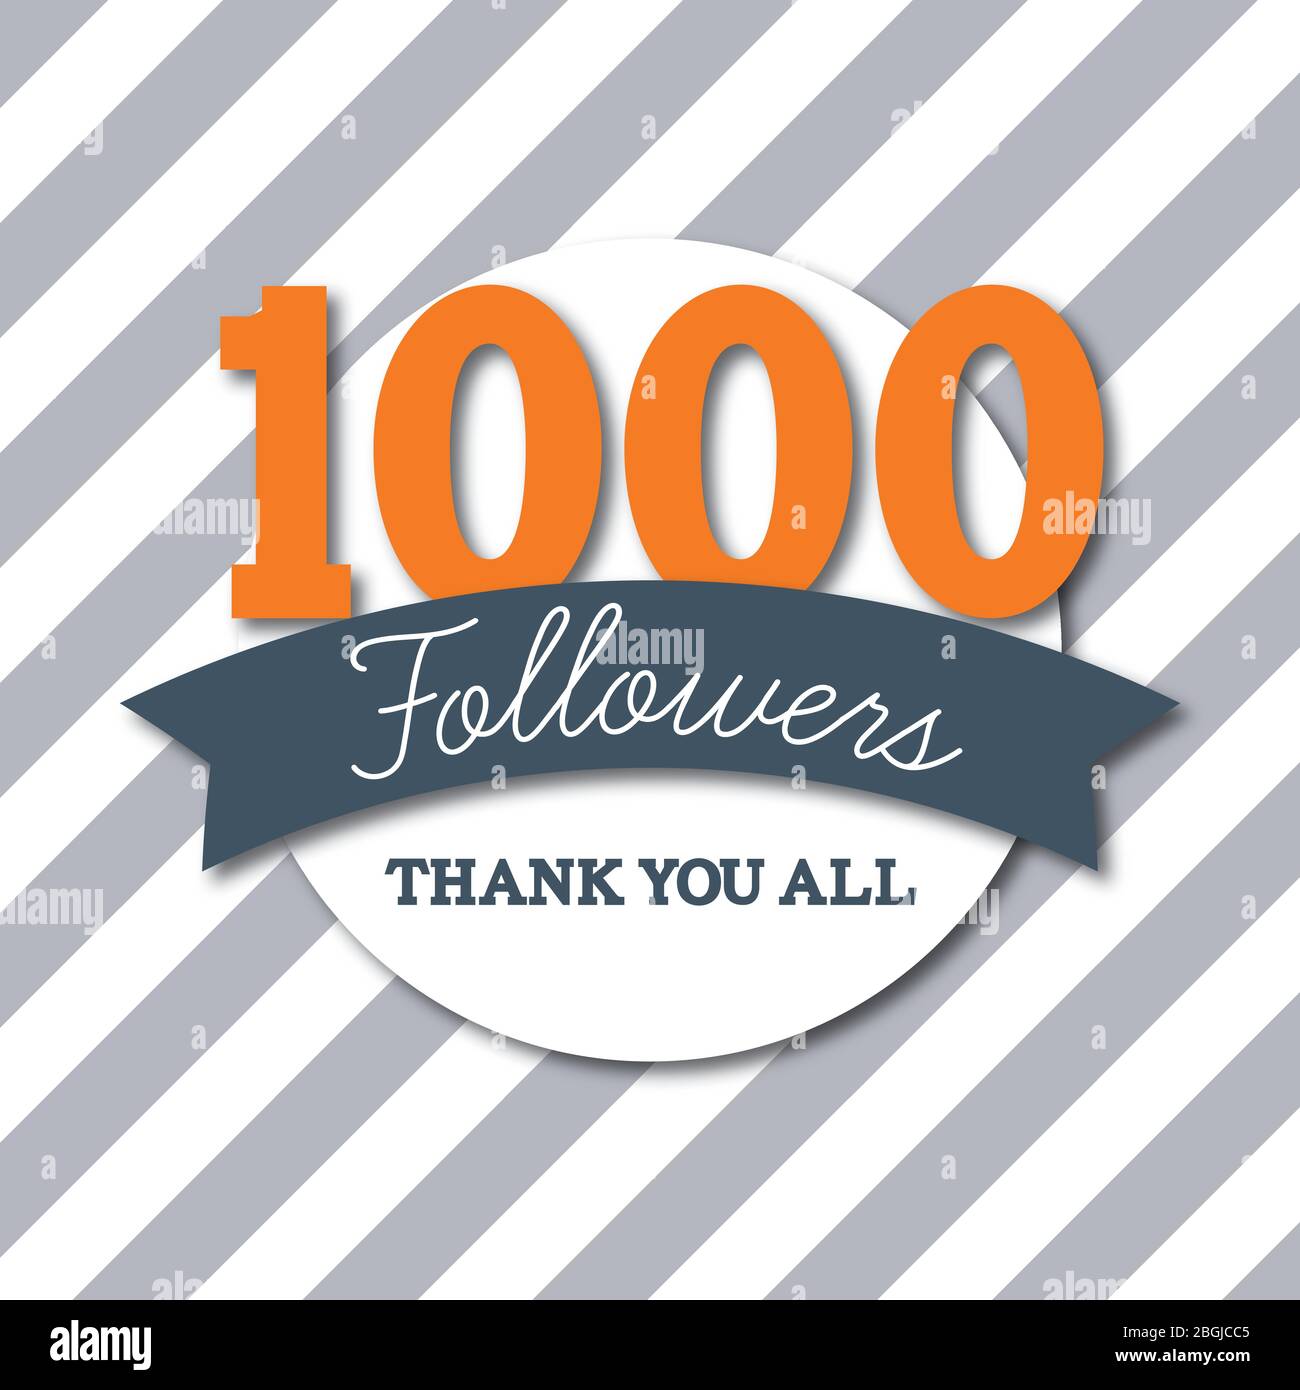 1000 followers. Thank you all. Social media subscribers banner Stock Vector